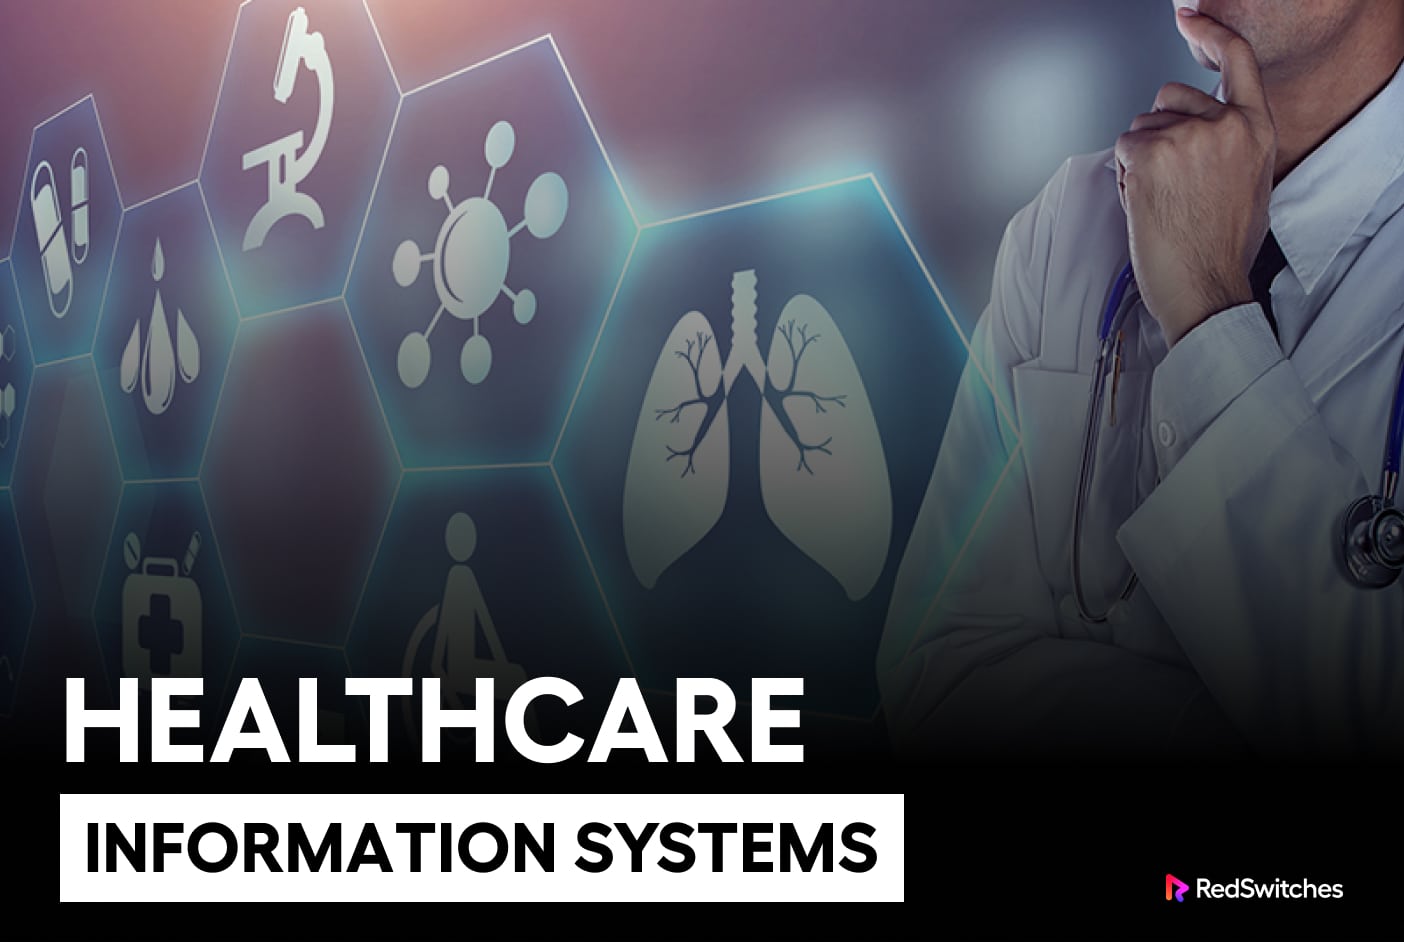 Healthcare information system is a examples of databases